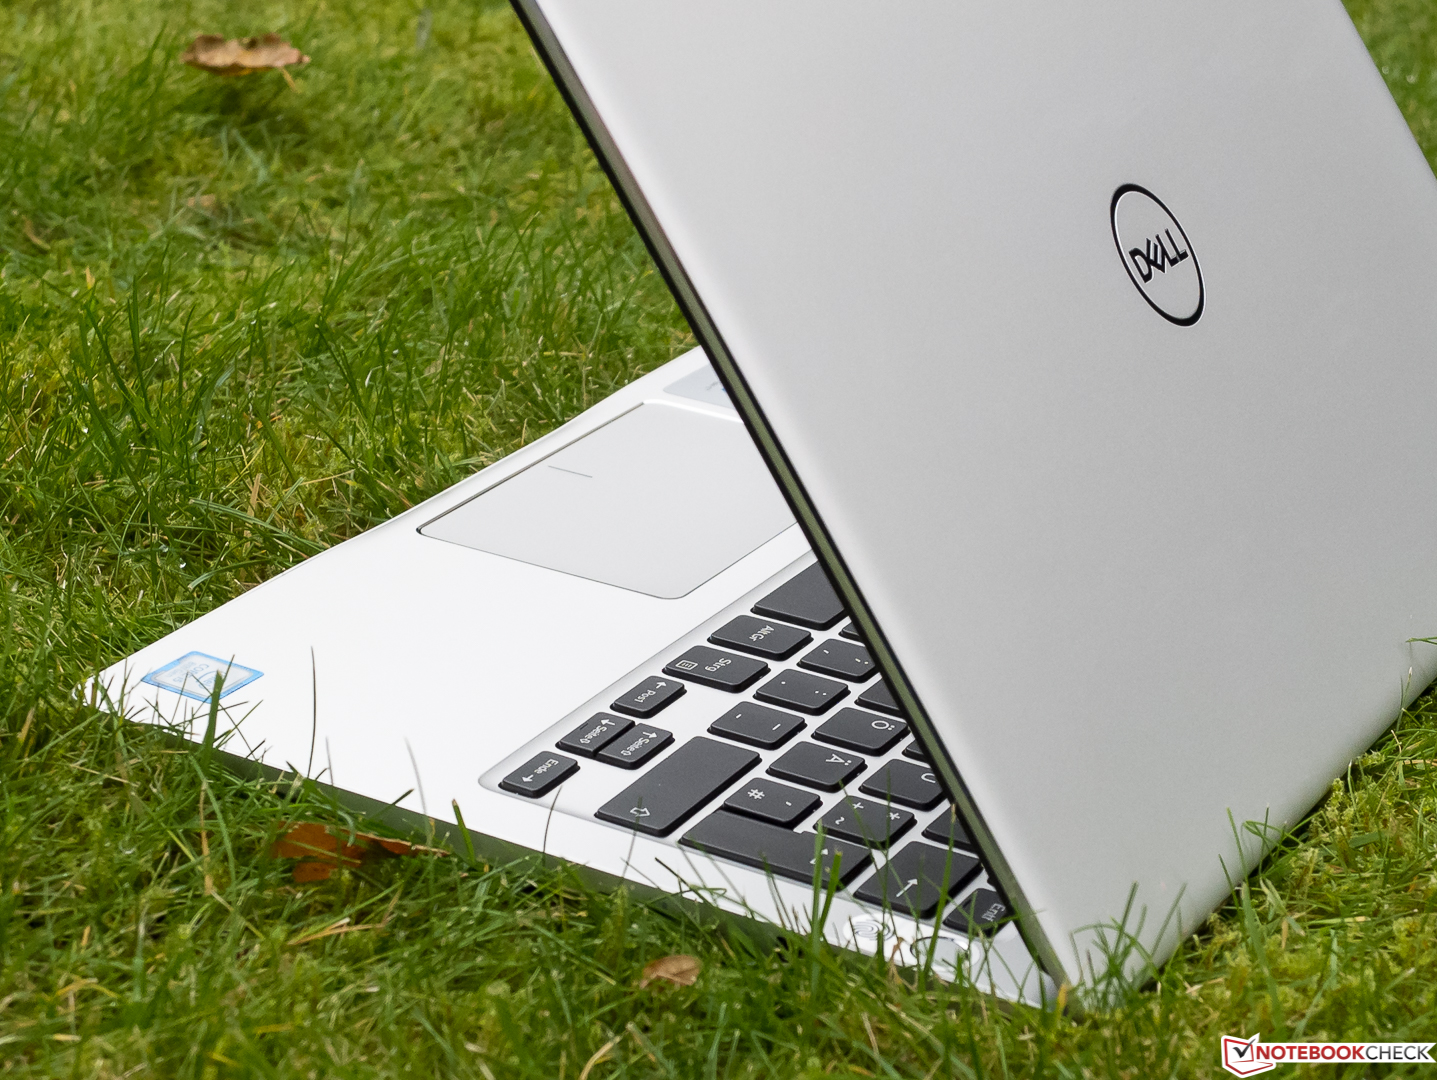 Dell Inspiron 13 7370 (i5-8250U) Laptop Review - NotebookCheck.net 